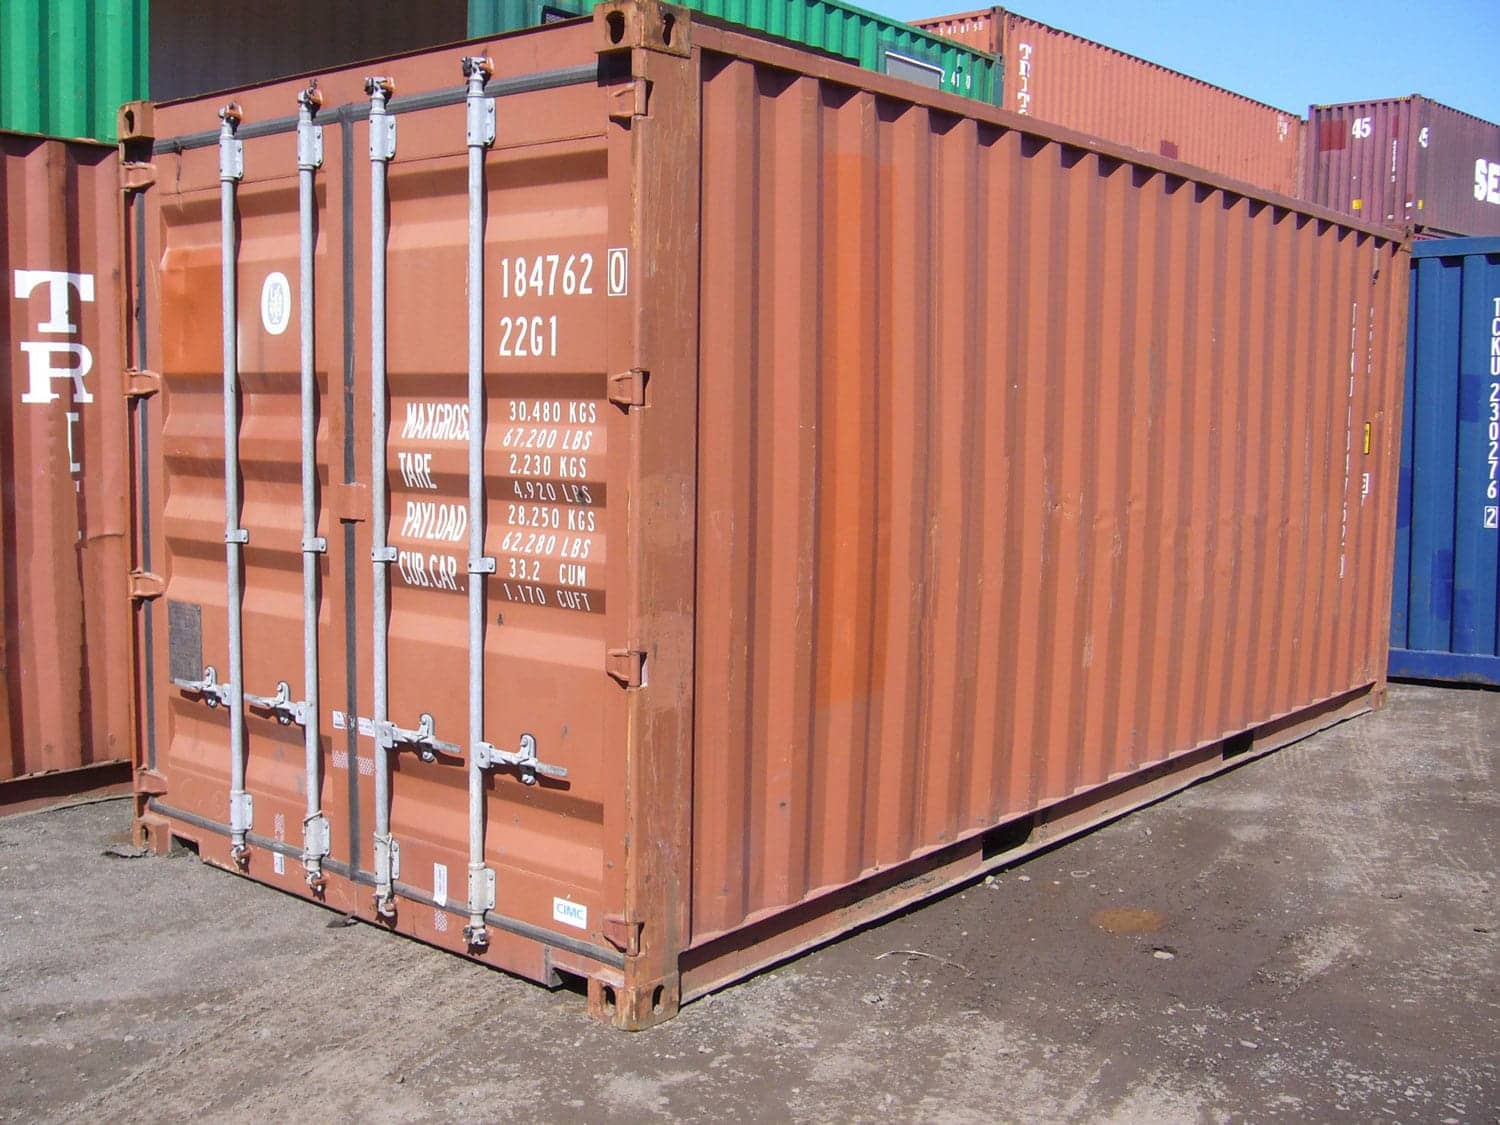 TRS Containers Grade A cargo container for export or ground storage